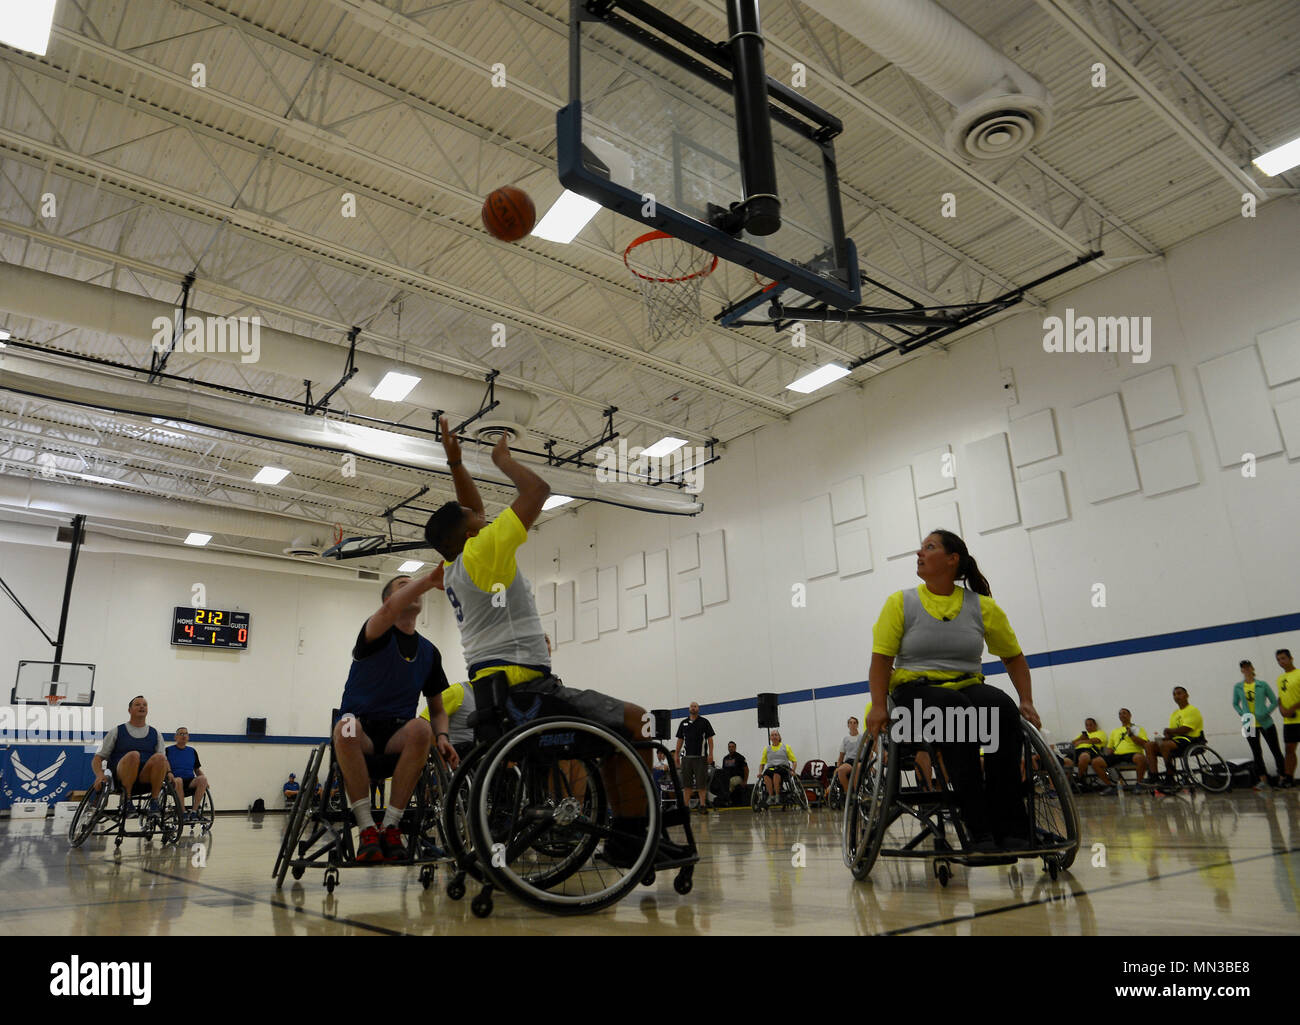 Participants of the Air force Wounded Warrior Program, play wheelchair basketball during the 2017 Joint Adaptive Sports Camp Aug. 29, 2017, at Joint Base Lewis-McChord, Wash. During Aug. 28-31, JBLM supported the 2017 JASC management team as they hosted a joint services camp at Cowan and Memorial Stadiums, and at other athletic venues across the installation. Cowan Stadium and Memorial Field was setup for all track and field events. The Directorate of Family and Morale, Welfare and Recreation tent was used for archery and shooting events, and Soldier’s Field House was used for swimming events. Stock Photo